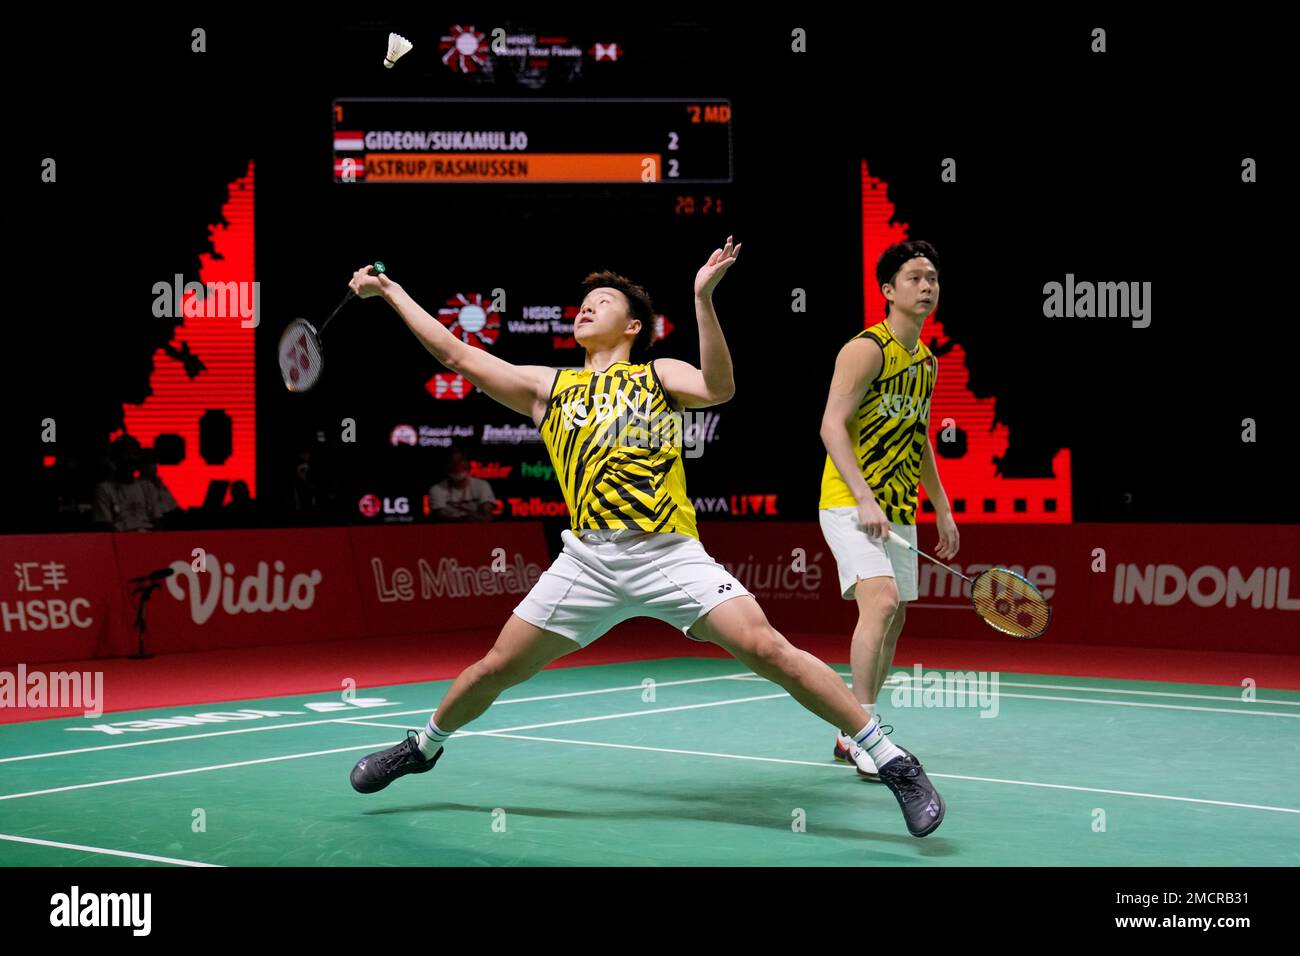 Indonesias Marcus Fernaldi Gideon, left, and Kevin Sanjaya Sukamuljo compete against Denmarks Kim Astrup and Anders Skaarup Rasmussen during their mens doubles badminton group stage match at the BWF World Tour Finals